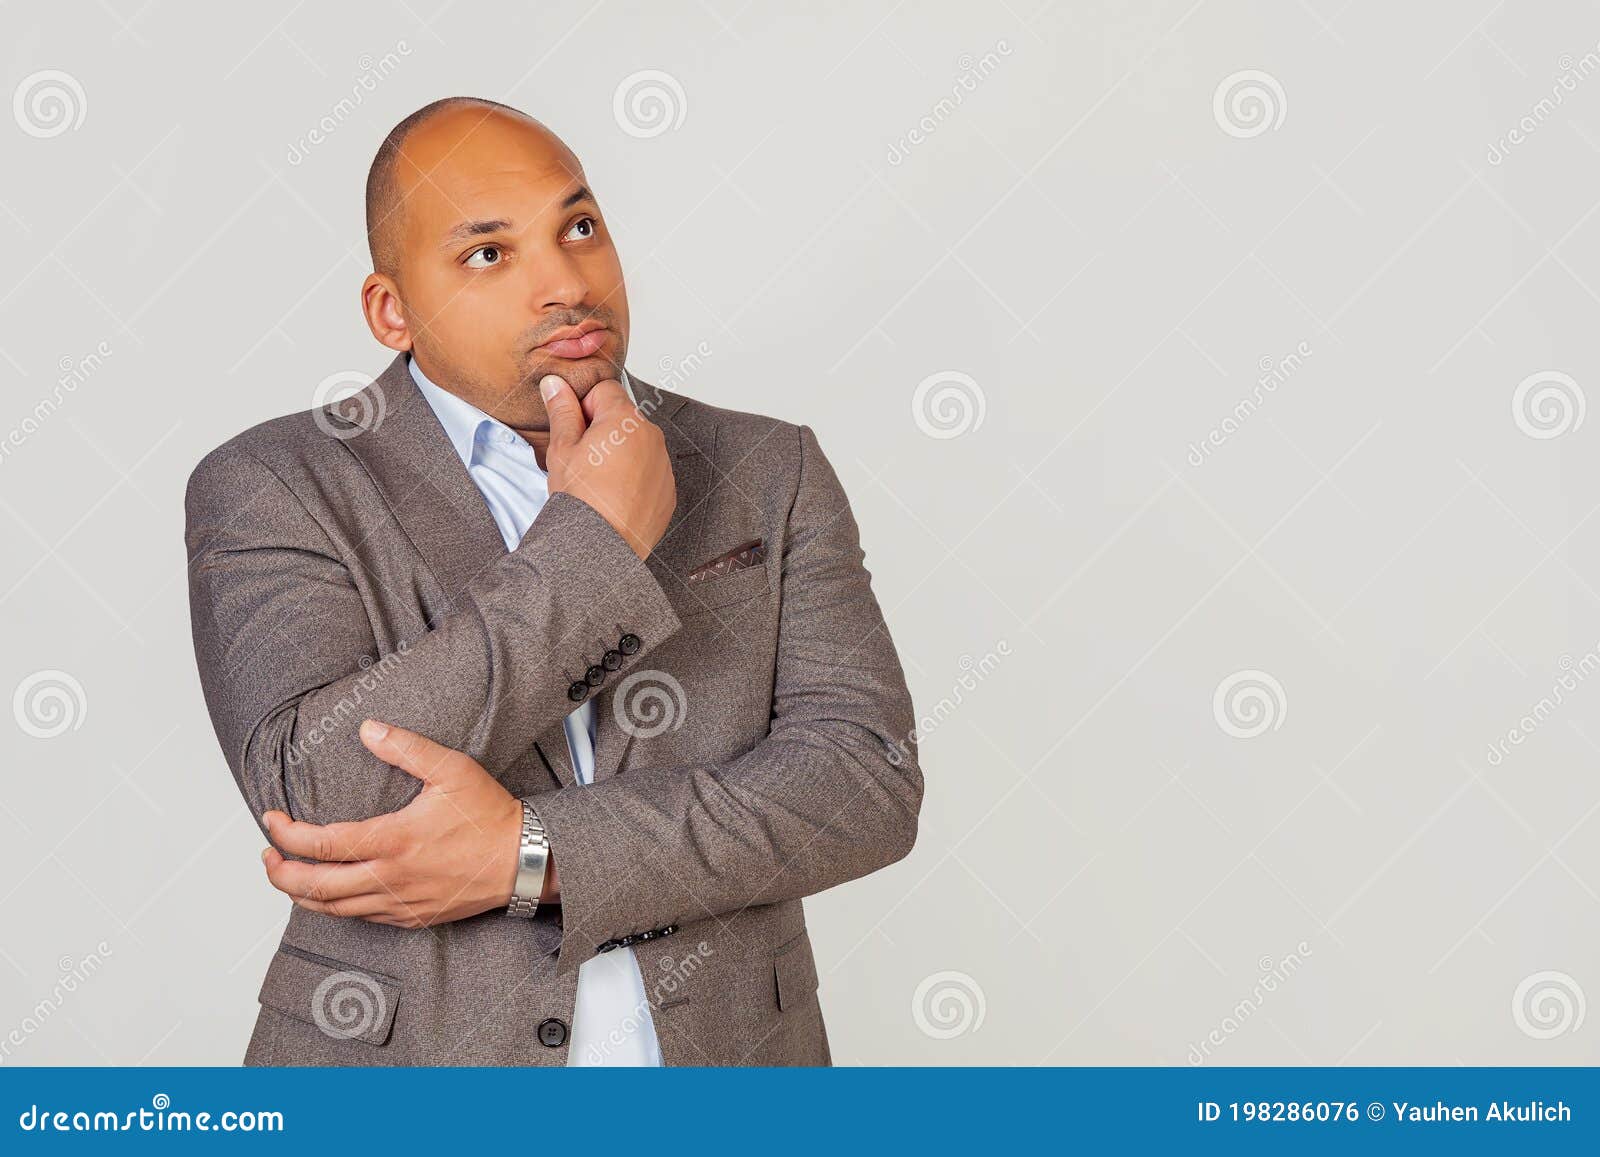 handsome young male african american businessman in jacket looking to the side and thinking touching chin with hand